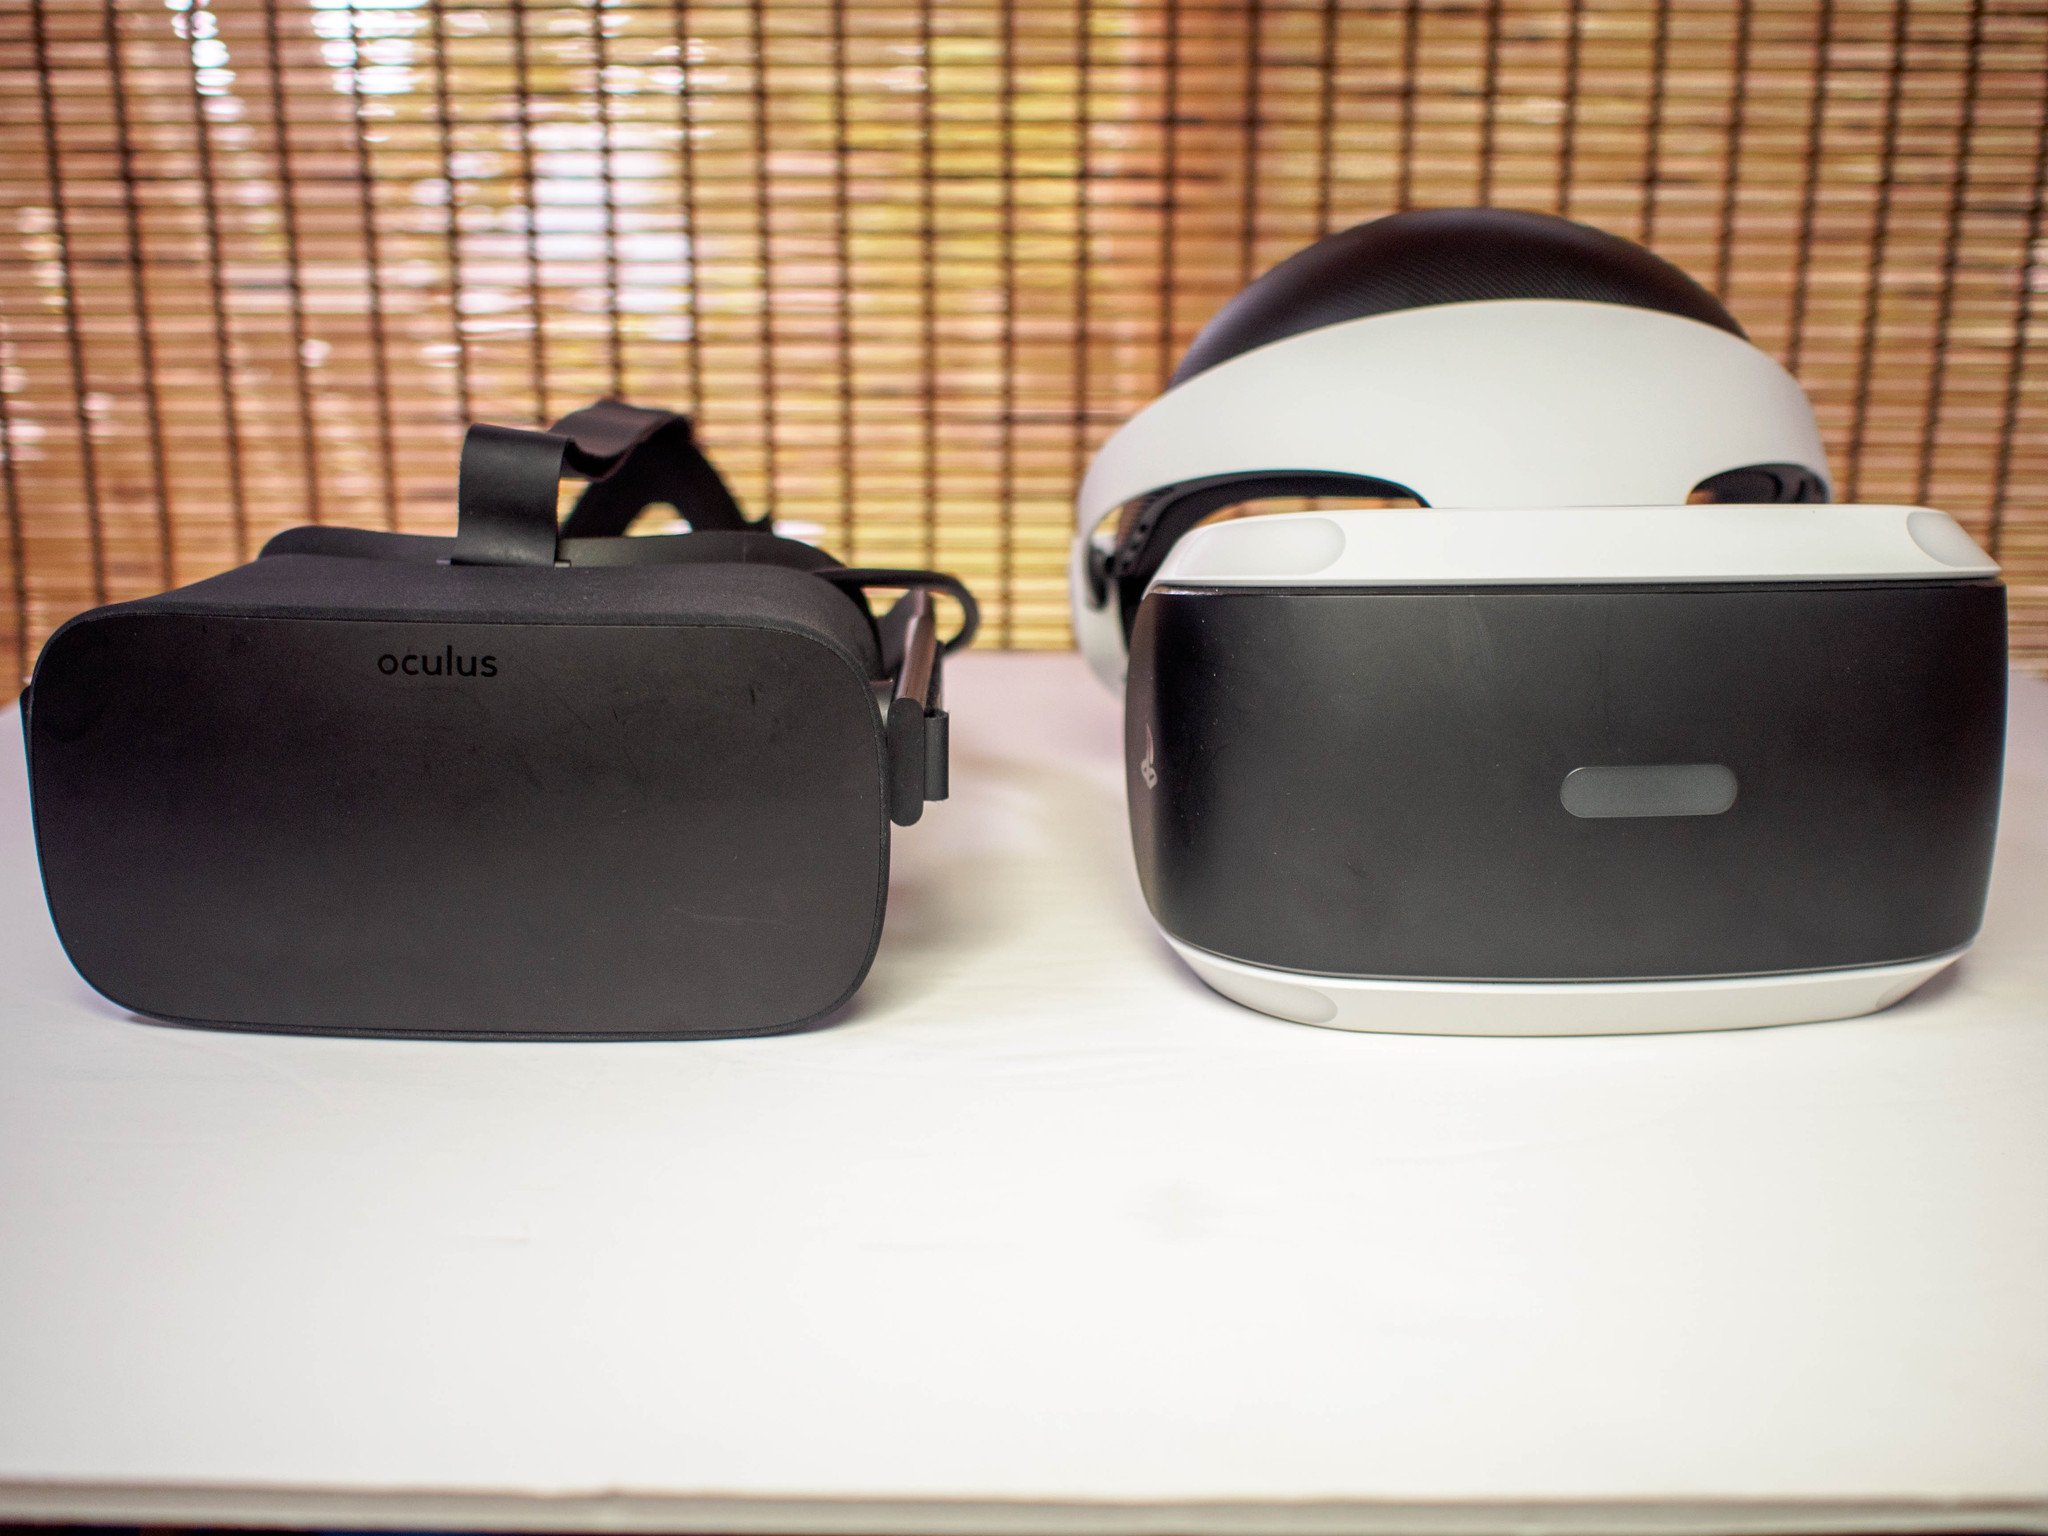 PlayStation VR vs. Oculus Rift: Virtually comparable